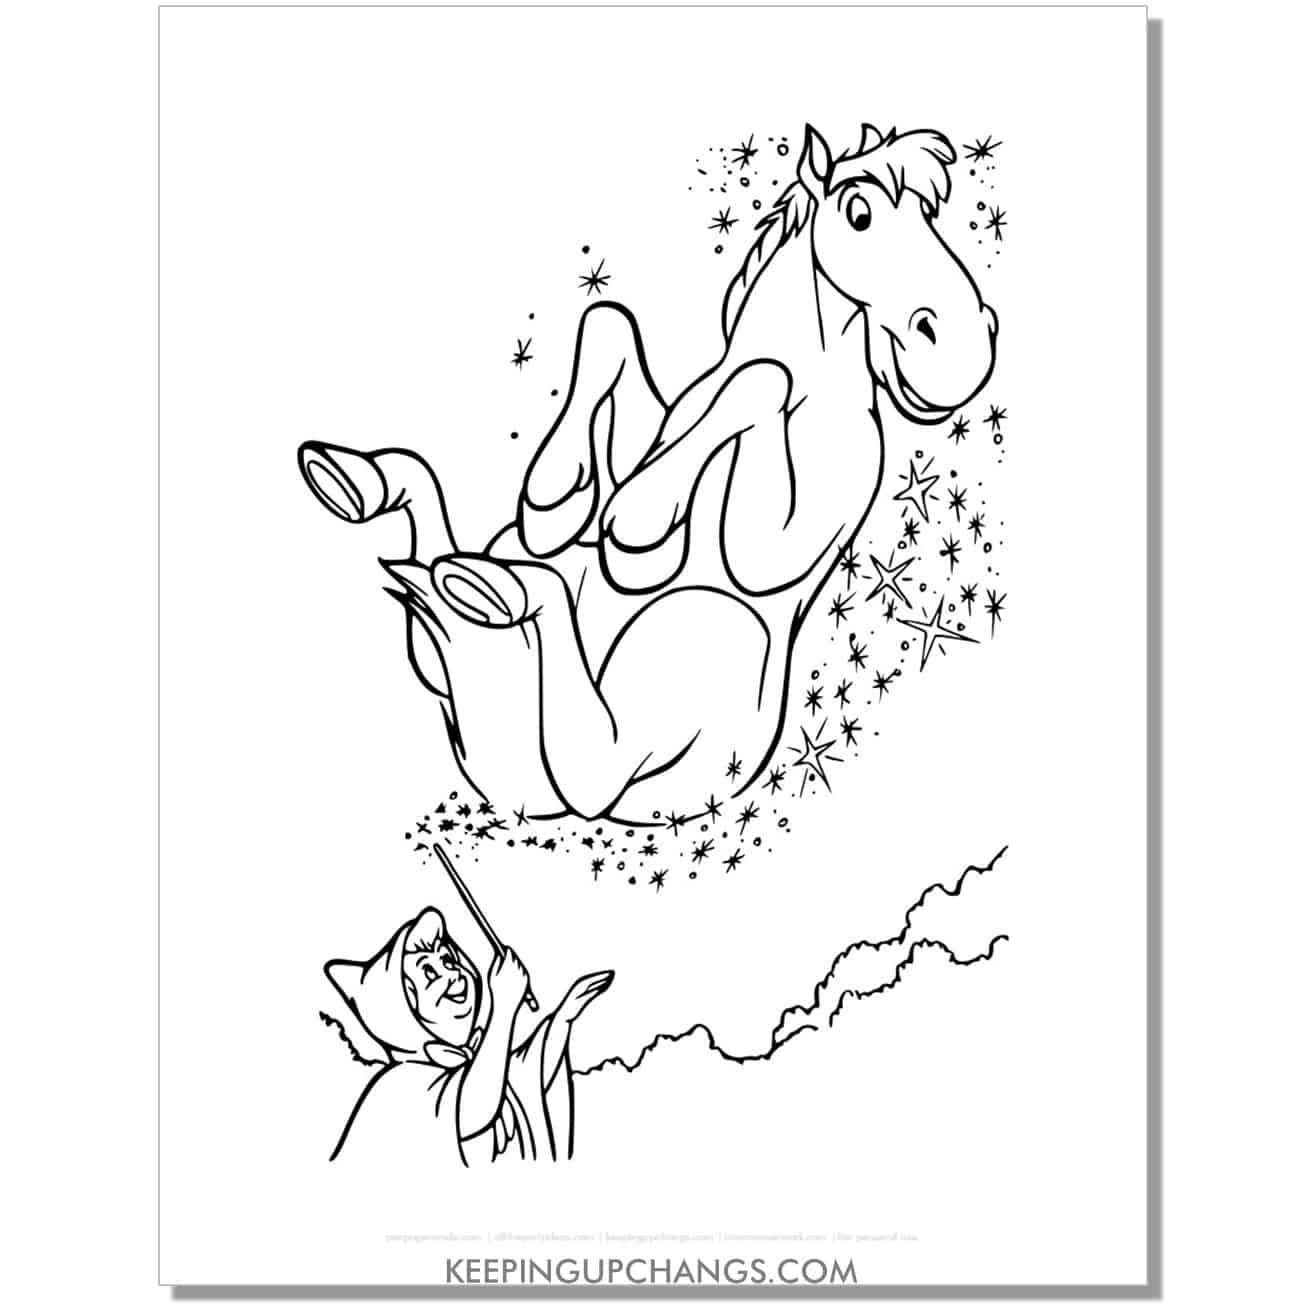 cinderella's horse major turns into stallion coloring page, sheet.